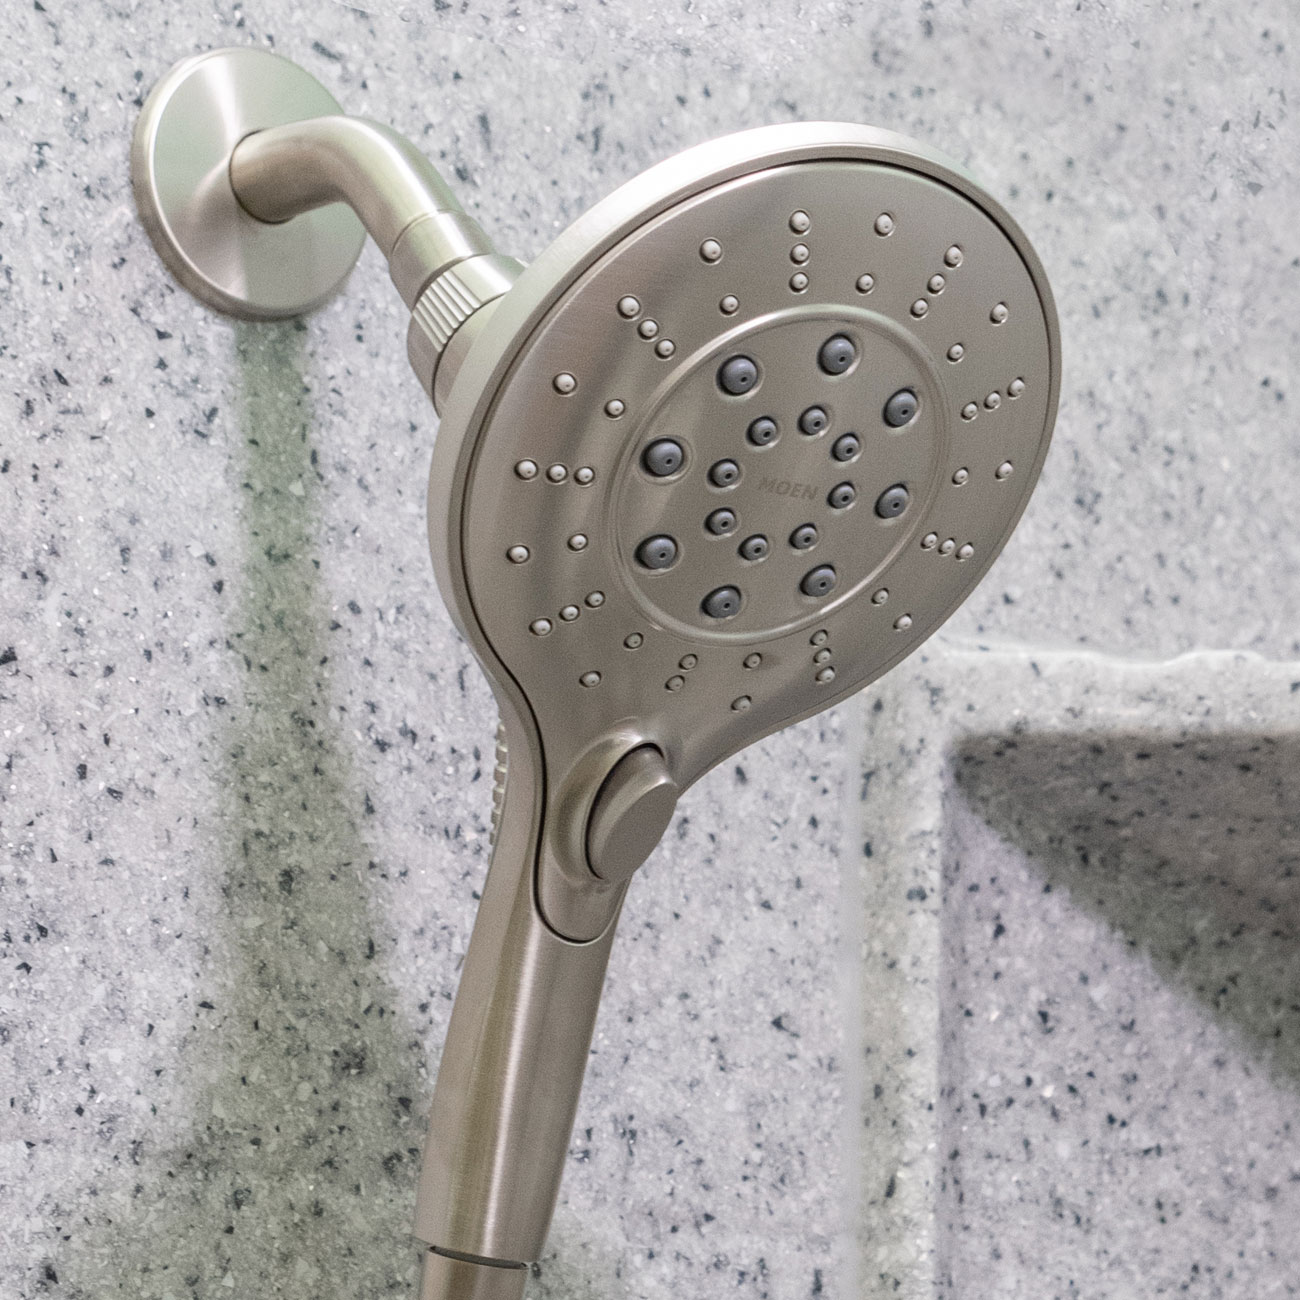 A leaf home solutions shower head